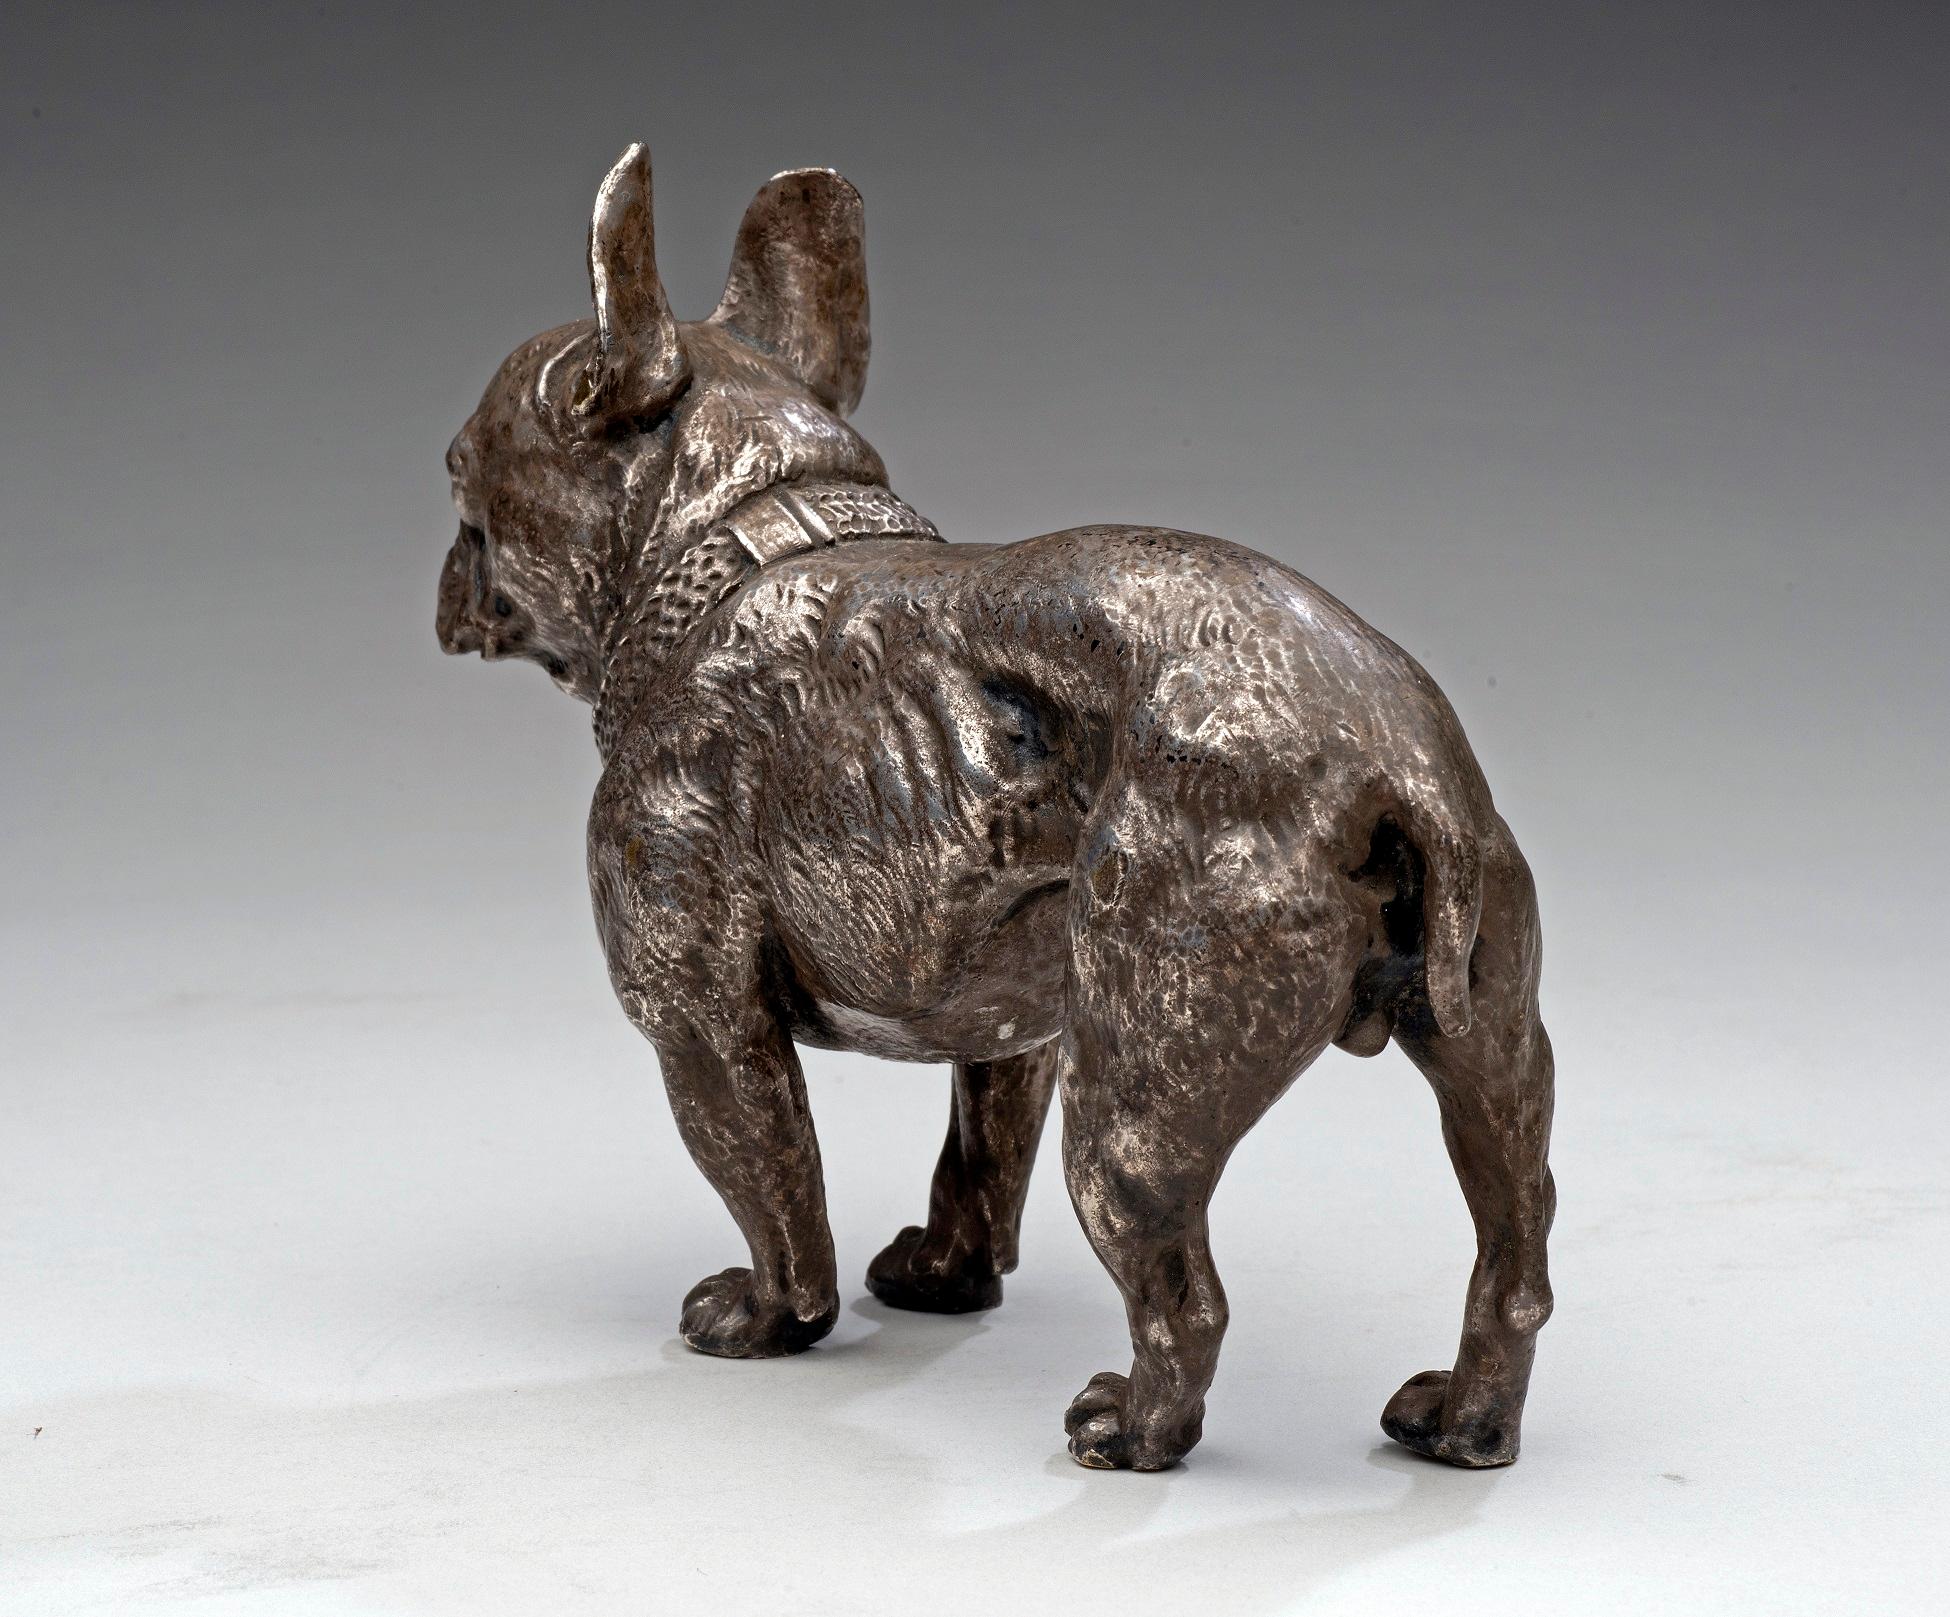 Dog Portrait of a Silvered Bronze French Bulldog circa 1880s-1890s - Gold Figurative Sculpture by Unknown